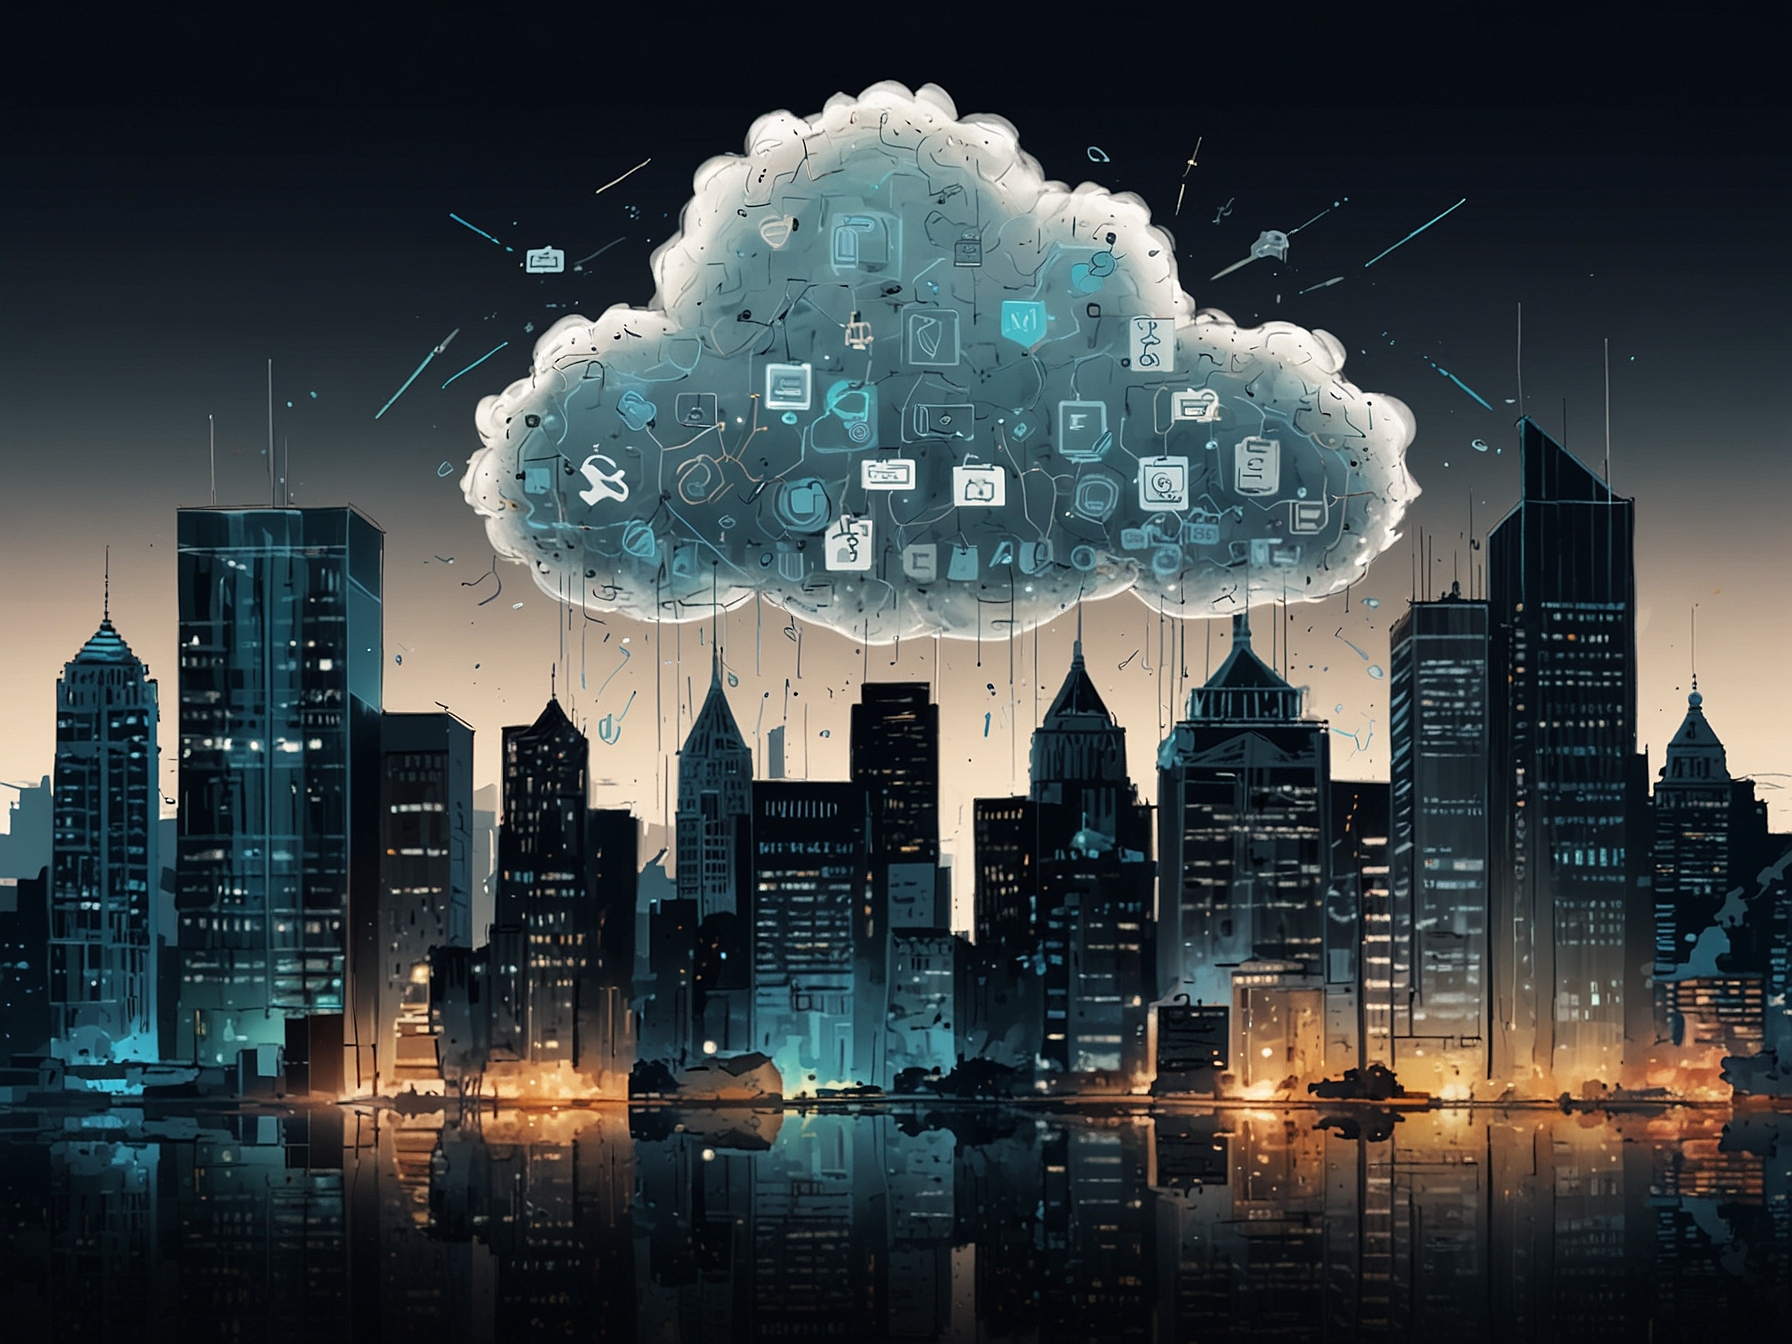 An illustration showing the integration of cloud technologies within financial services, symbolizing innovation and digital transformation.